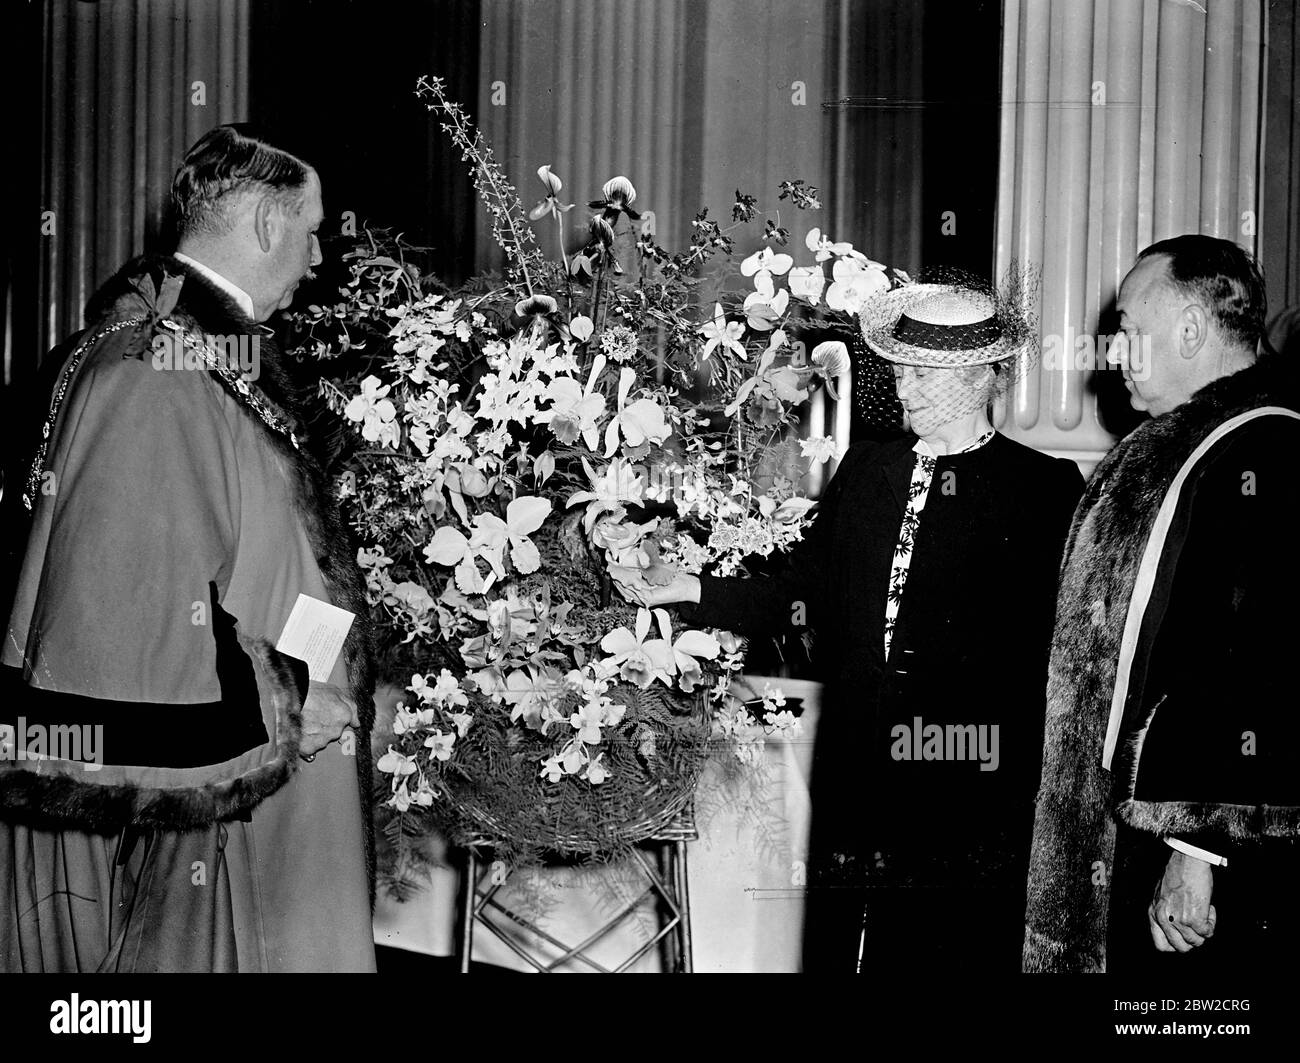 Including a bloom of every known species of orchid, the annual presentation by the Worshipful Company of Gardeners to the Lord Mayor of London of fruit, flowers and vegetables took place at the Mansion House, London. The gifts, made in accordance with the custom 300 years old, is in lieu of tax levied on Cheapside. Photo shows: The Lady Mayoress, Sir Frank Bowater, receiving the basket of every known species of orchid at that Mansion House, from Mr Ernest Thornton Smith, master of the Worshipful Company of Gardeners. The one the Lady Mayoress is holding is an orchid flower named Lady Frank Bow Stock Photo